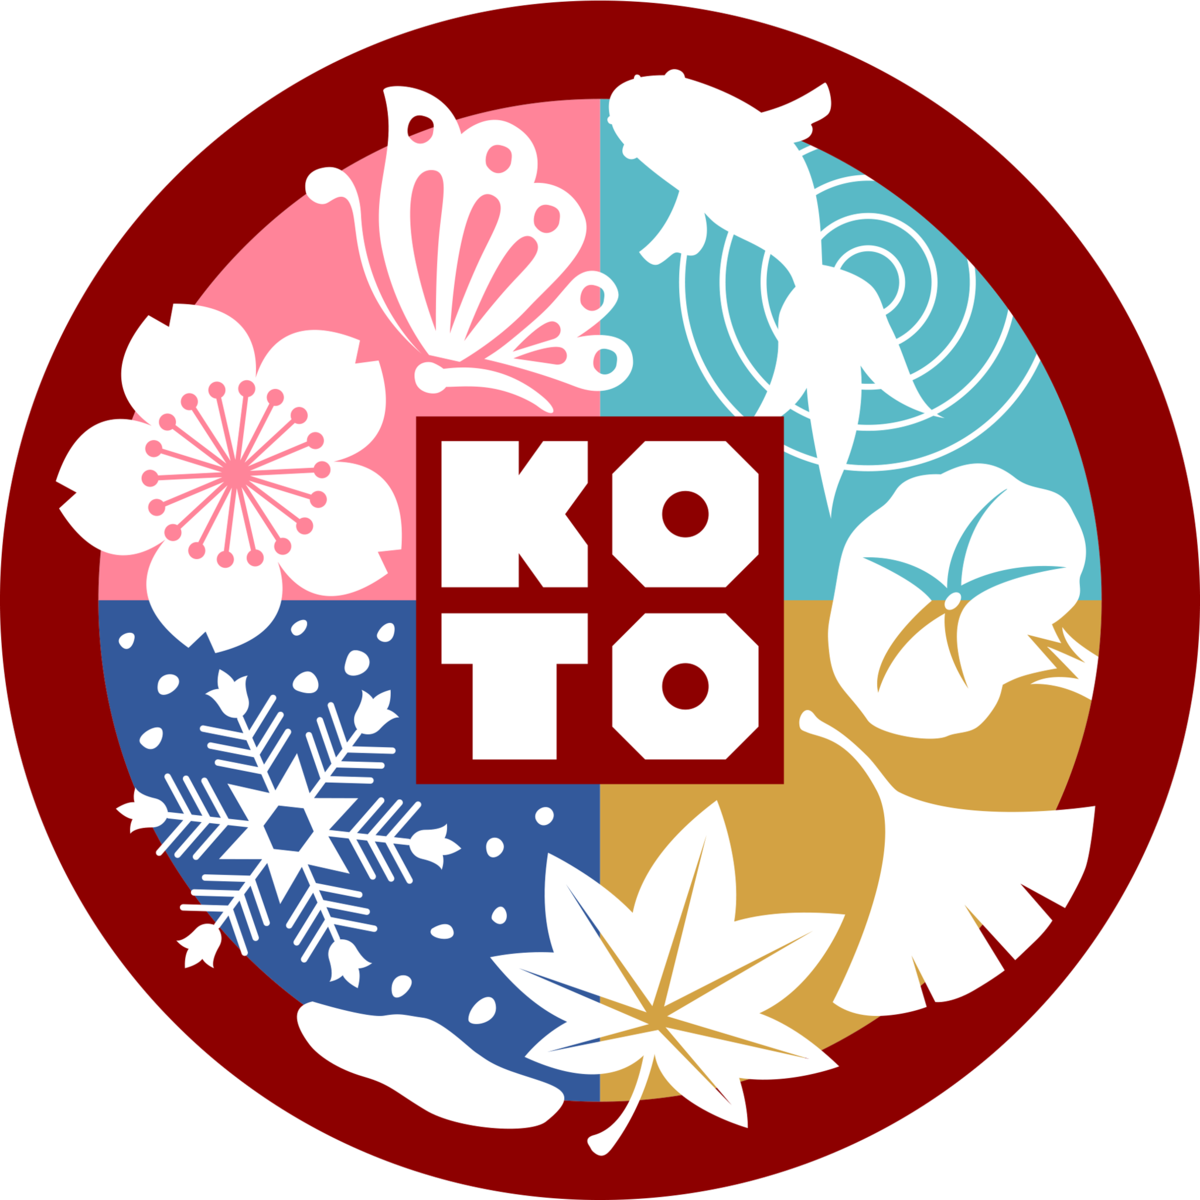 Koto cryptocurrency make it better place for you and for me lyrics